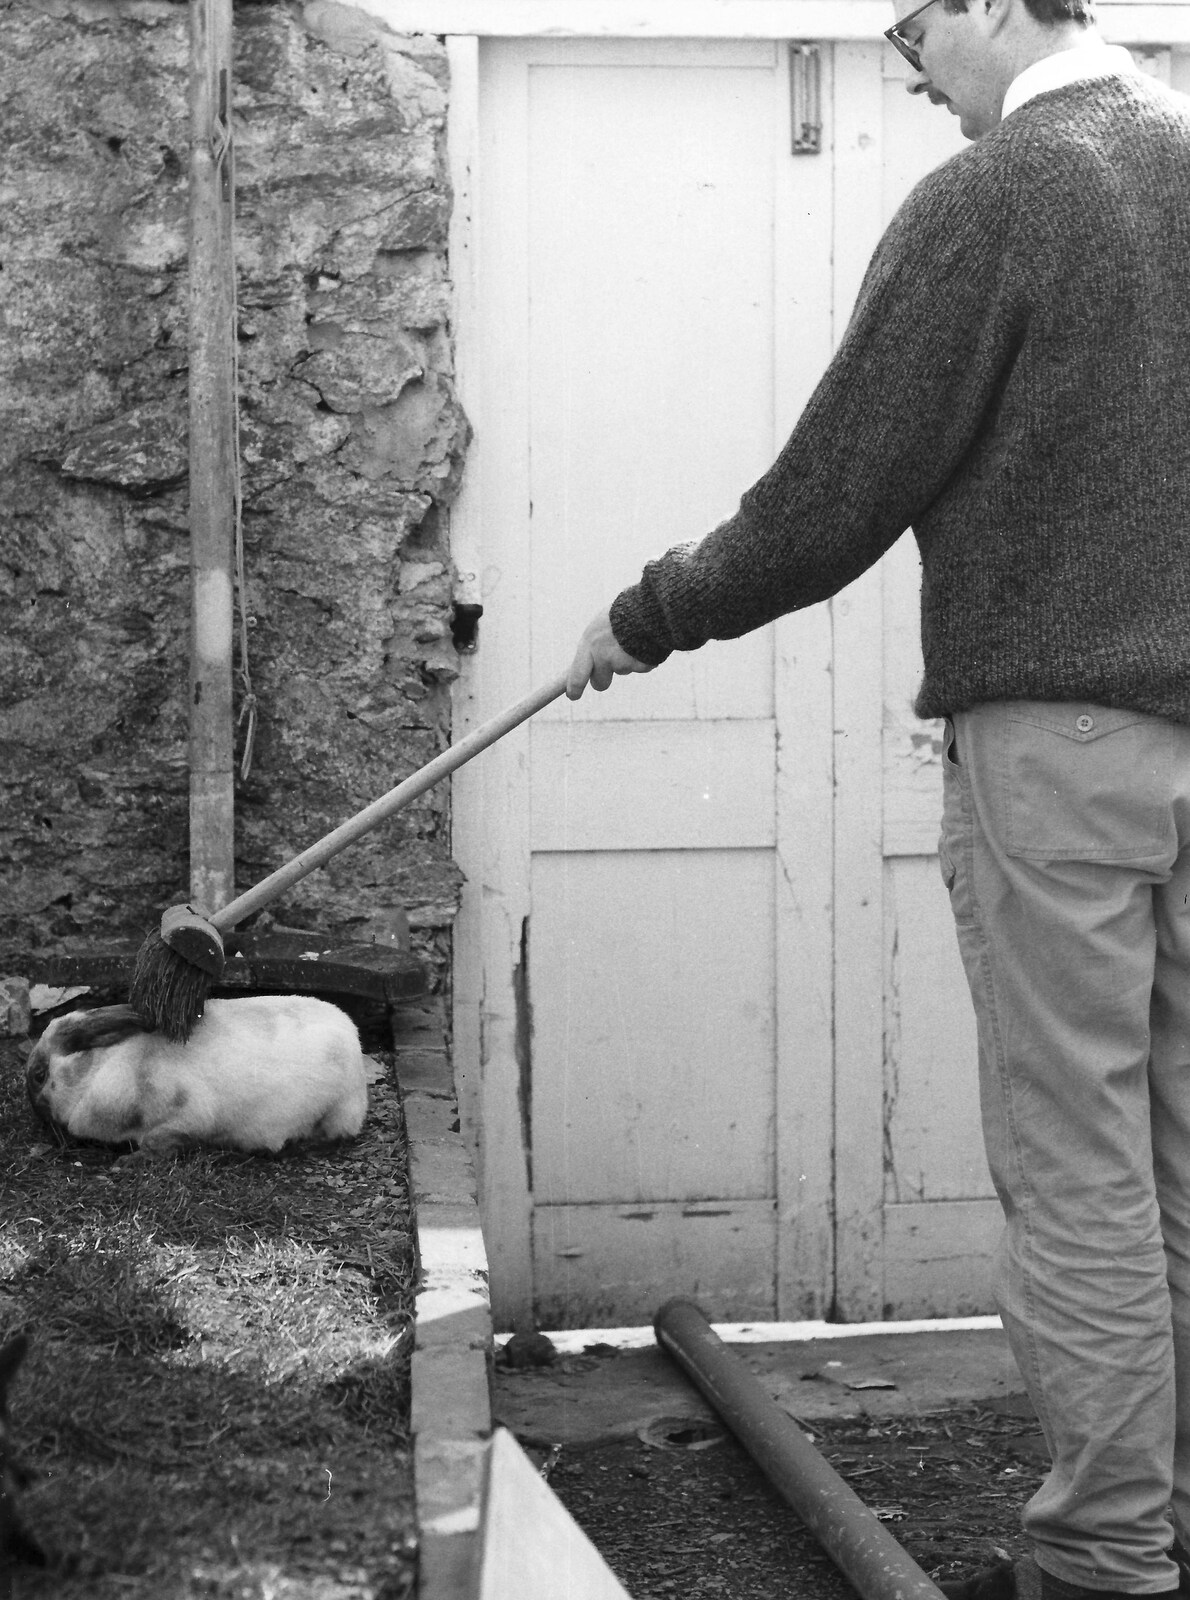 Ed gives Friday the rabbit a brush from Uni: A Neath Road Summer, St. Jude's, Plymouth - 18th August 1987